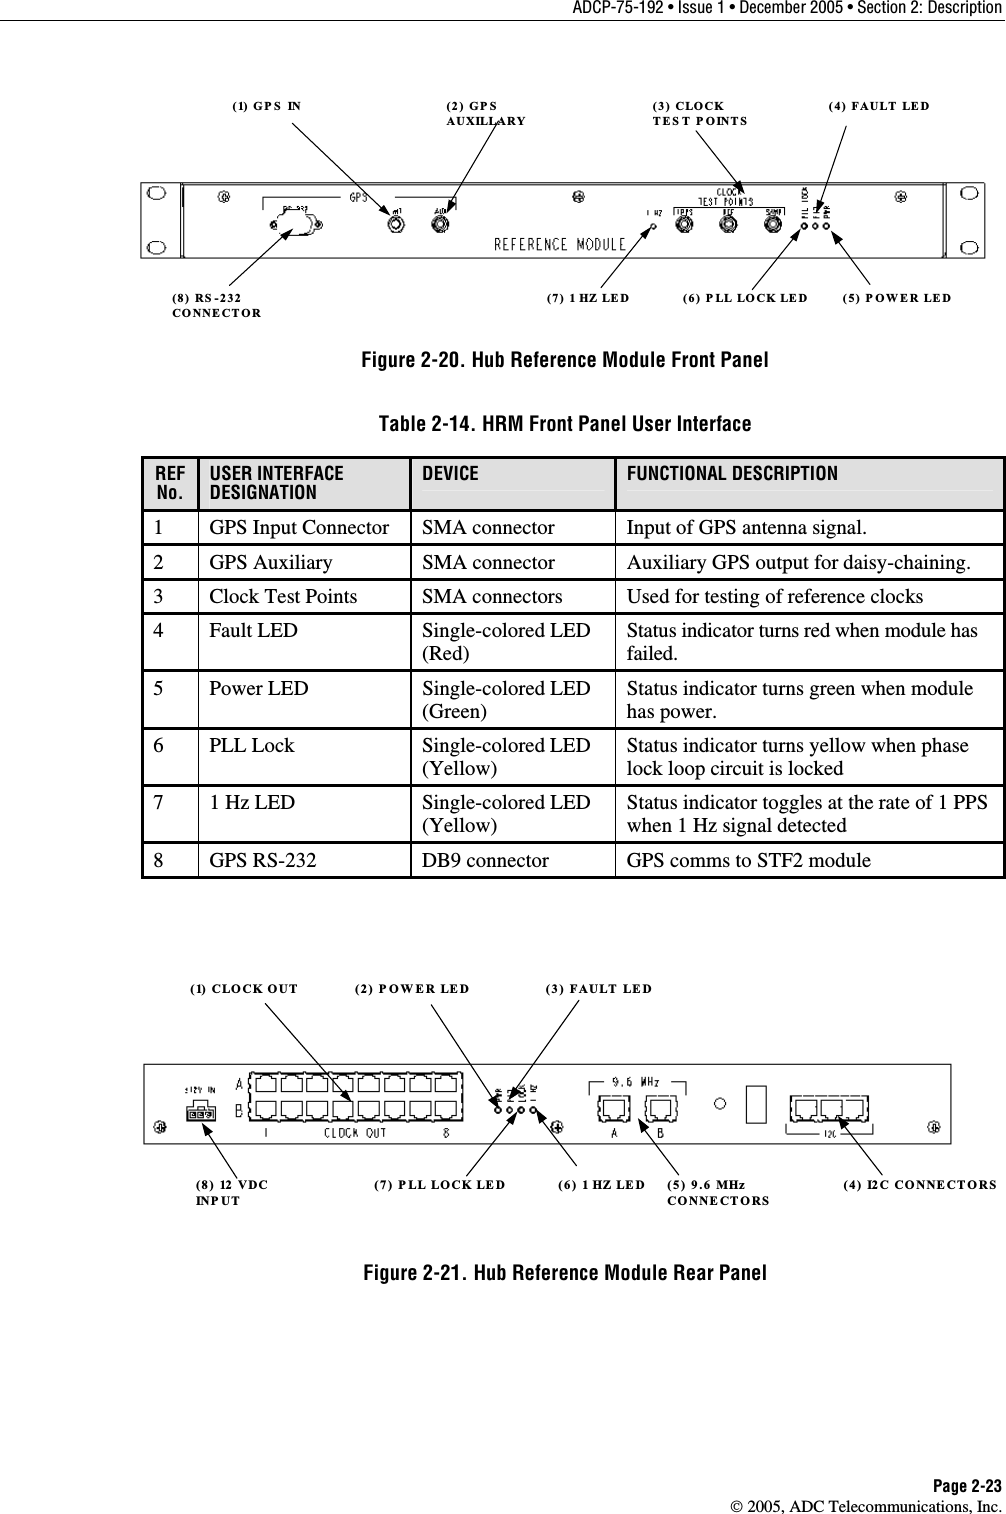 ADCP-75-192 • Issue 1 • December 2005 • Section 2: Description Page 2-23  2005, ADC Telecommunications, Inc. (8) RS -232 CONNECTOR(1) GPS  IN(7) 1 HZ LED(2) GPS  AUXILLARY(5) POWER LED(3) CLOCK TES T POINTS(4) FAULT LED(6) P LL LOCK LED Figure 2-20. Hub Reference Module Front Panel Table 2-14. HRM Front Panel User Interface REFNo. USER INTERFACE DESIGNATION DEVICE  FUNCTIONAL DESCRIPTION 1  GPS Input Connector  SMA connector  Input of GPS antenna signal.  2  GPS Auxiliary  SMA connector  Auxiliary GPS output for daisy-chaining. 3  Clock Test Points  SMA connectors  Used for testing of reference clocks 4 Fault LED  Single-colored LED (Red) Status indicator turns red when module has failed.  5 Power LED  Single-colored LED (Green)  Status indicator turns green when module has power. 6 PLL Lock  Single-colored LED (Yellow)  Status indicator turns yellow when phase lock loop circuit is locked 7  1 Hz LED  Single-colored LED (Yellow)  Status indicator toggles at the rate of 1 PPS when 1 Hz signal detected 8  GPS RS-232  DB9 connector  GPS comms to STF2 module  (8) 12 VDC IN P U T(1) CLOCK OUT(6) 1 HZ LED (4) I2C CONNECTORS(2) POWER LED (3) FAULT LED(7) P LL LOCK LED (5) 9.6 MHz CONNECTORS Figure 2-21. Hub Reference Module Rear Panel 